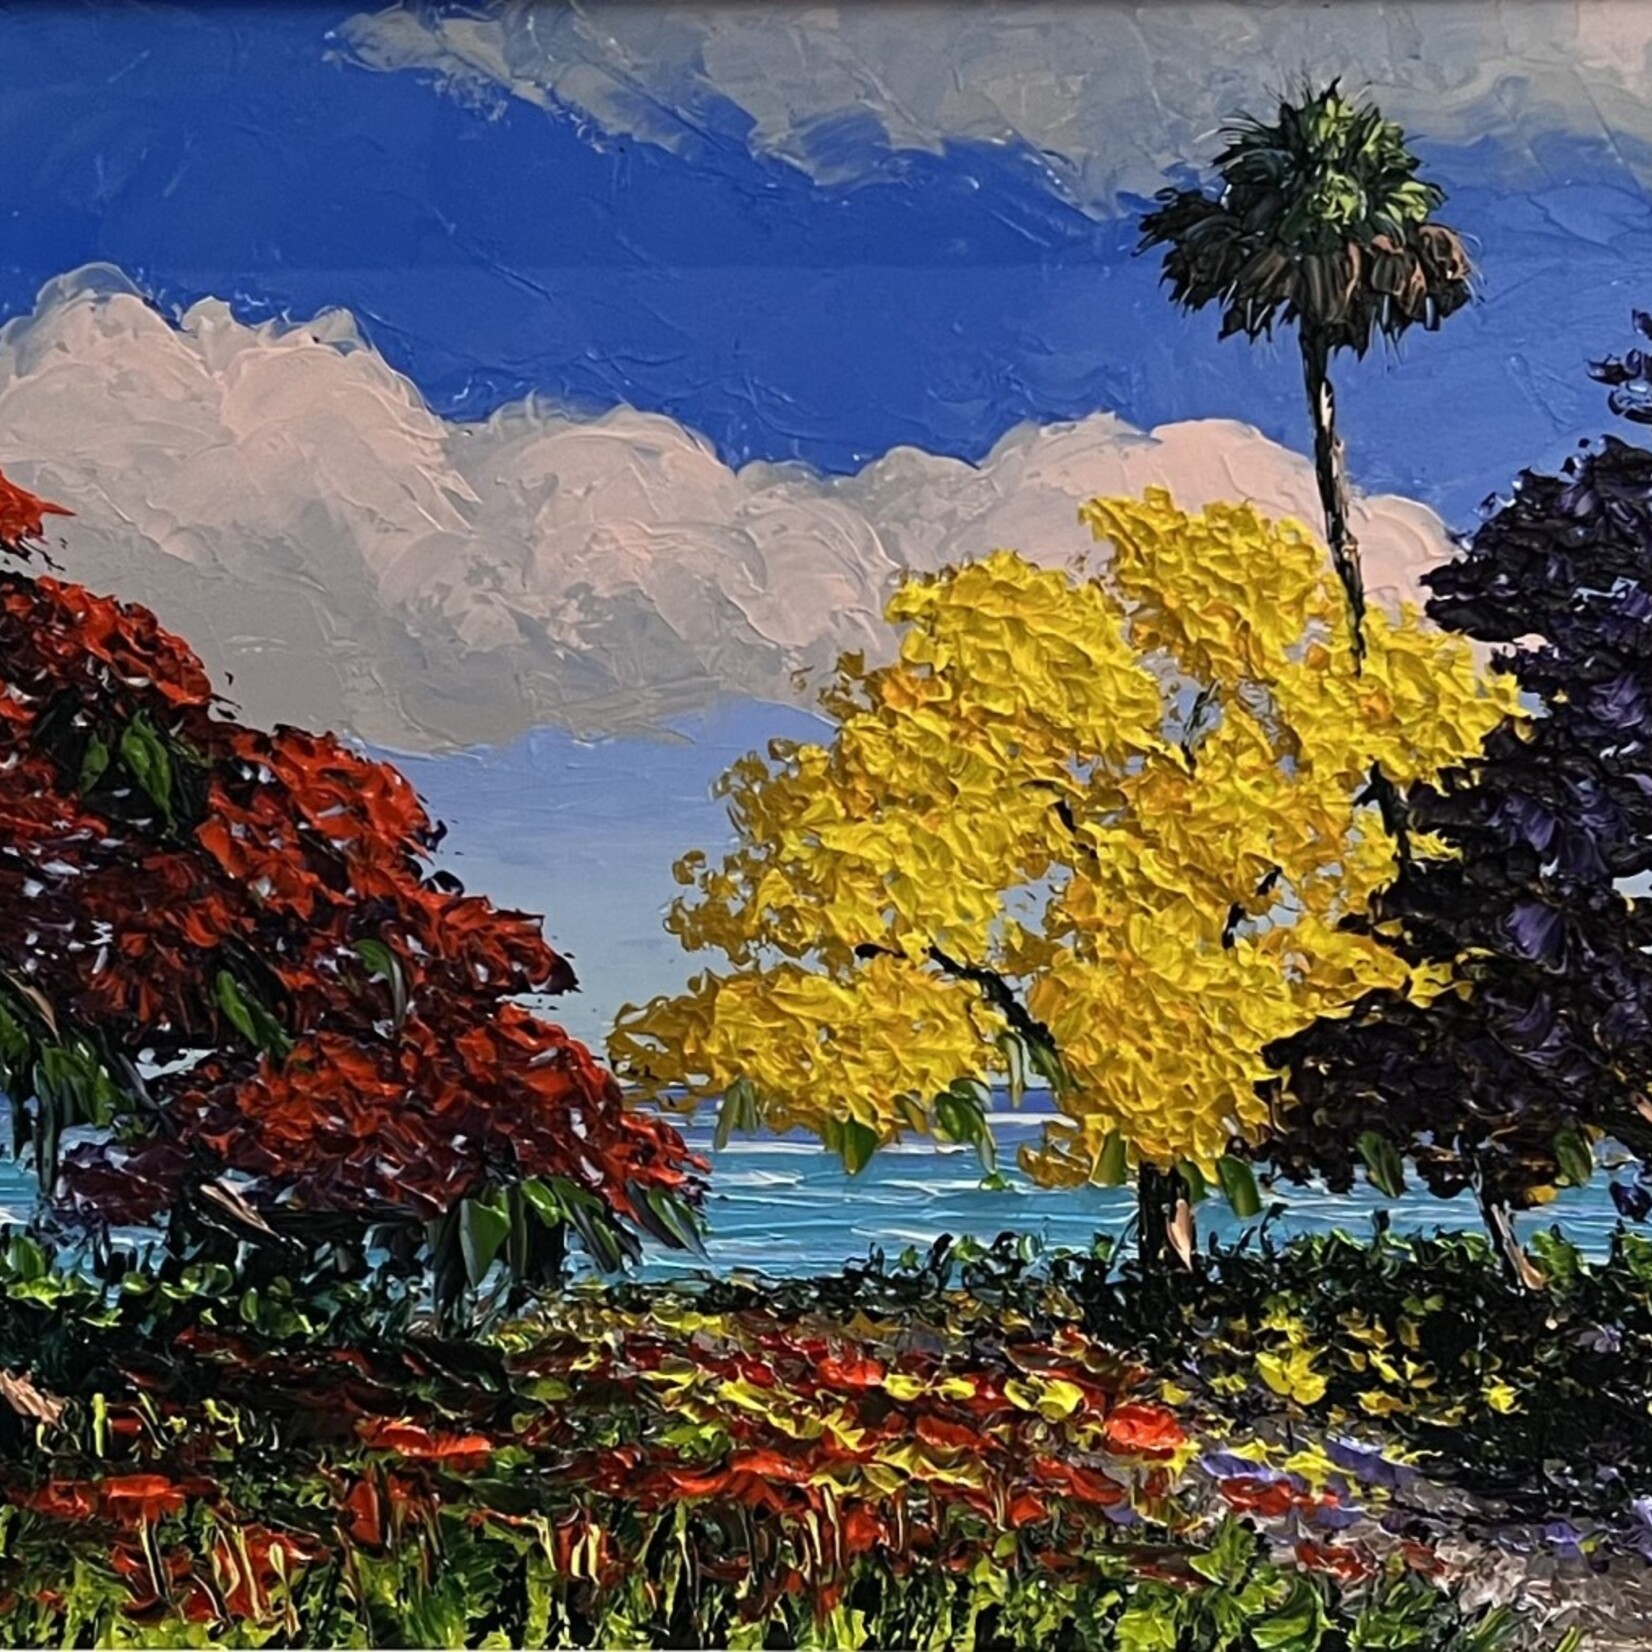 Highwaymen: Original, 2nd Generation, Legacy Trifecta Trees of Colorful Blooms, by Mark Stanford, Palette knife oil on canvas, framed, 14x27" RARE